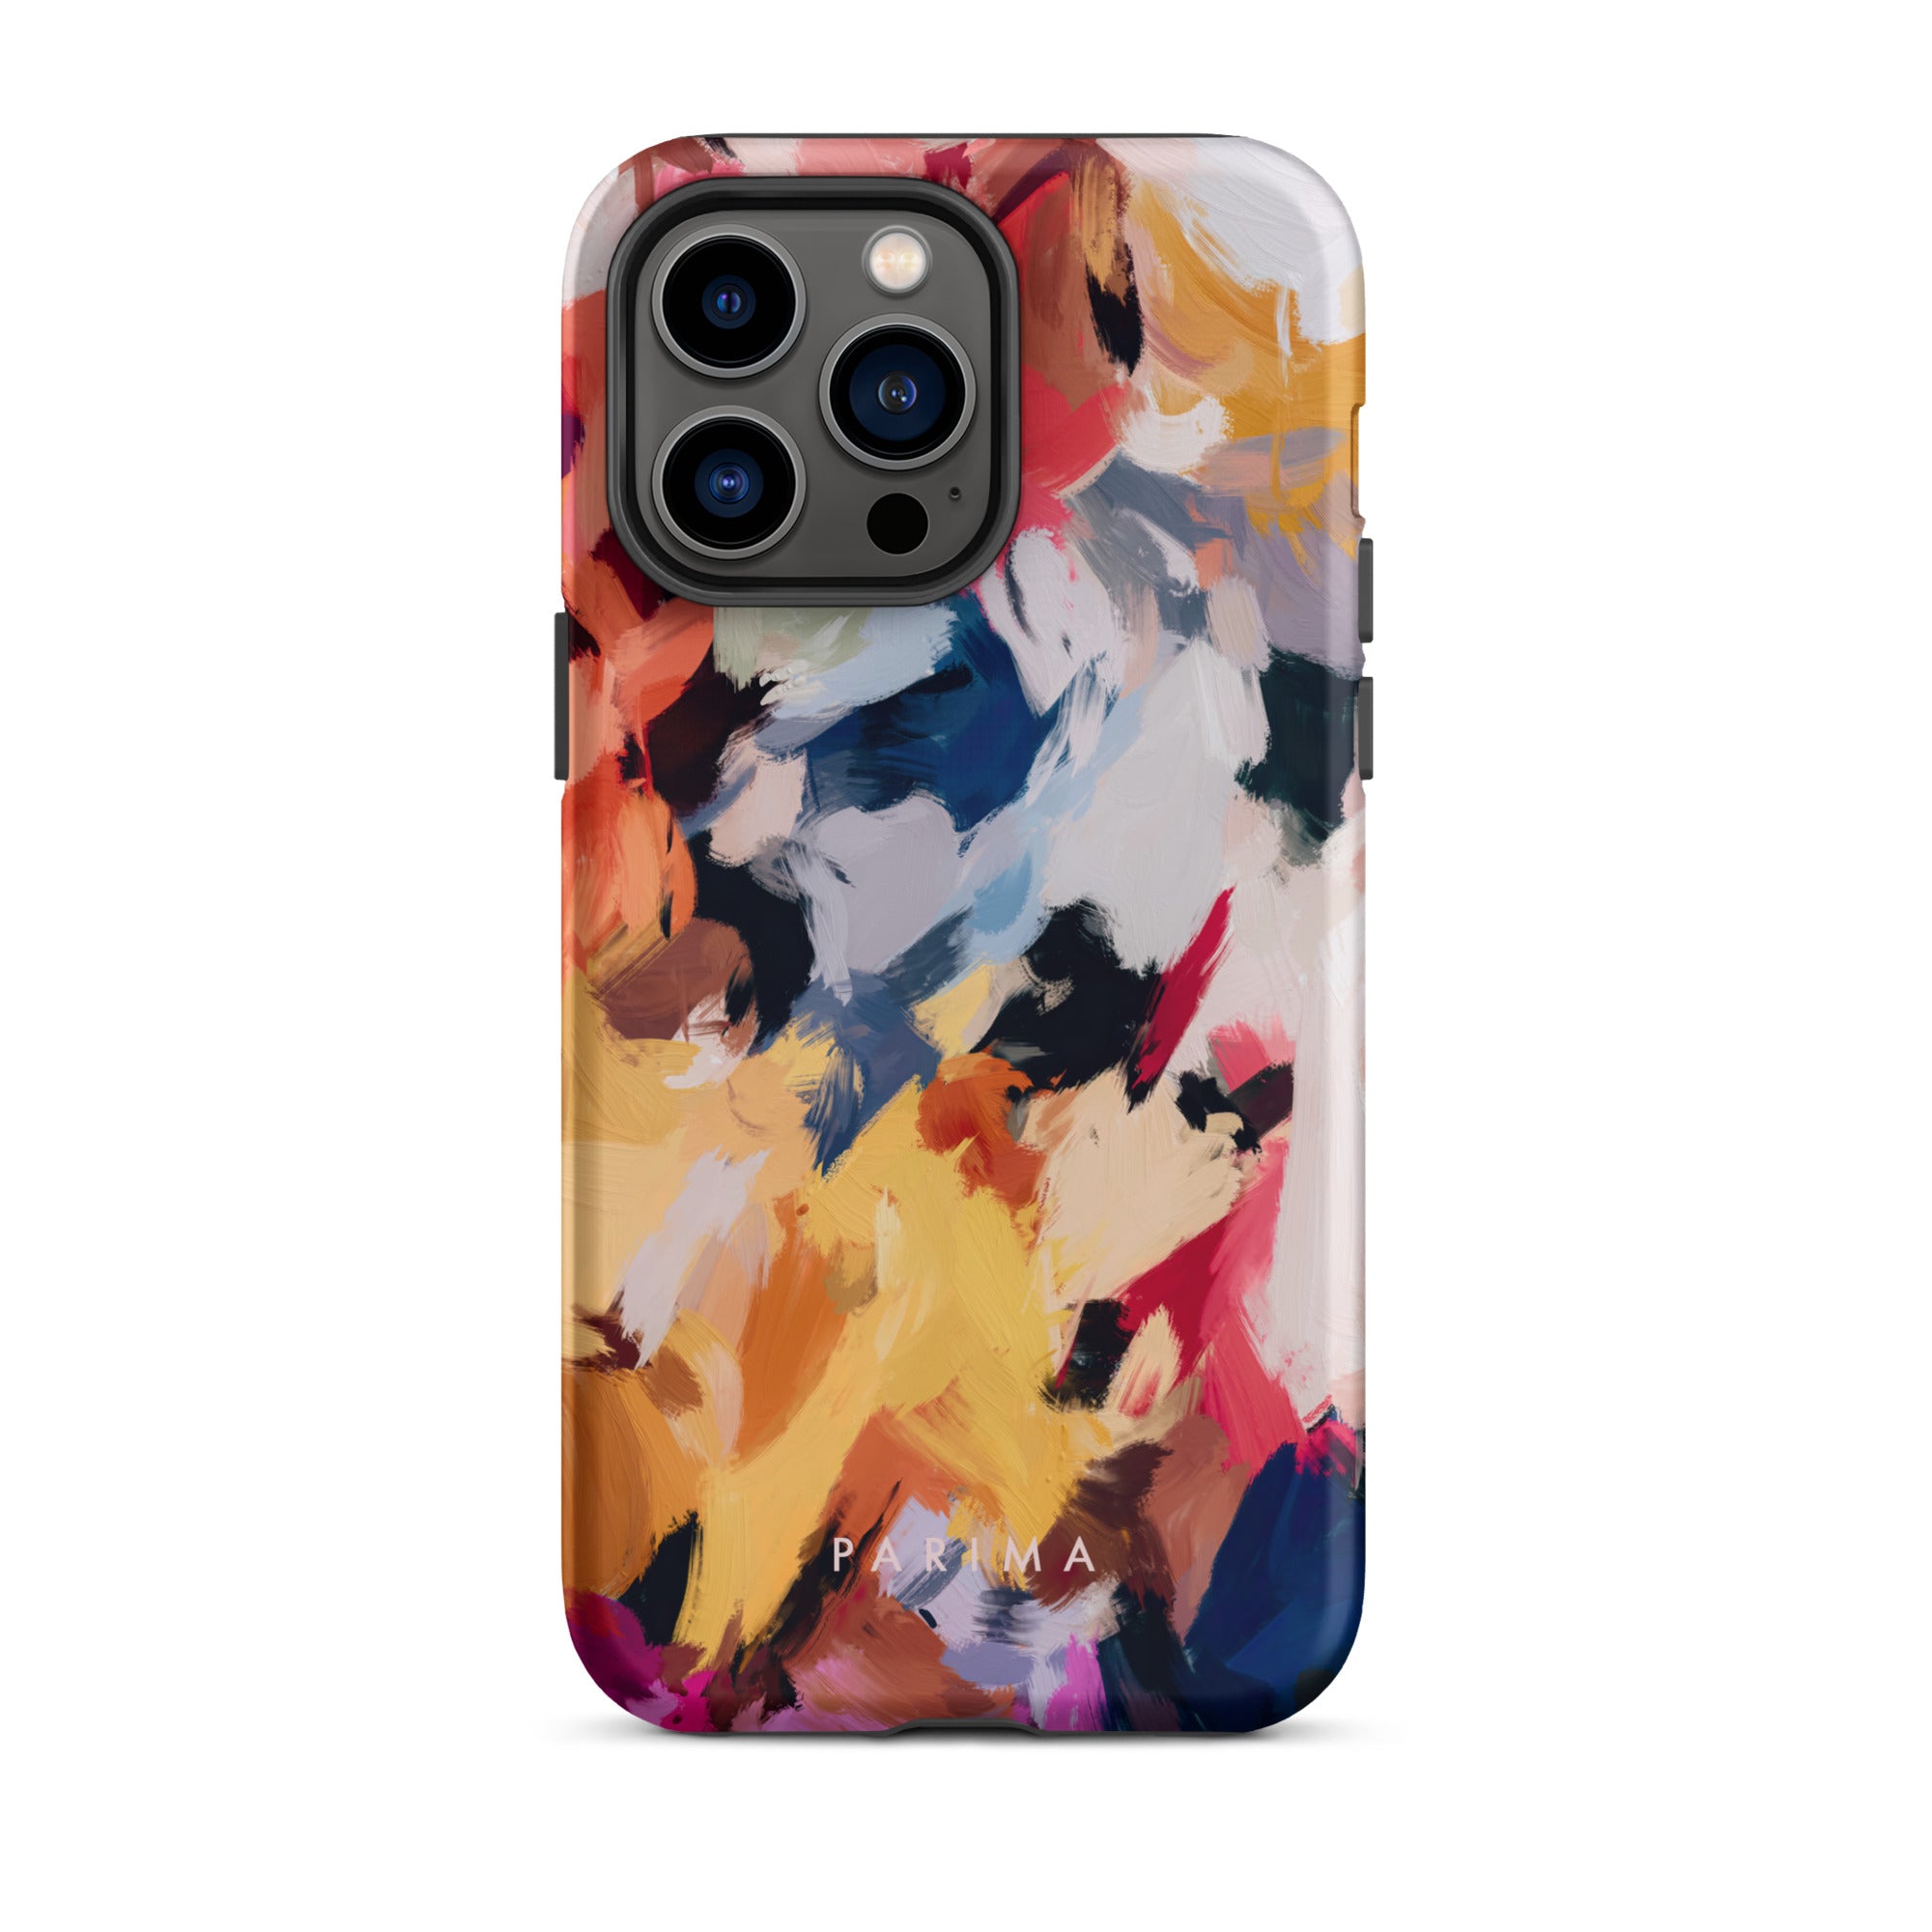 Wilde, blue and yellow abstract art on iPhone 14 Pro Max tough case by Parima Studio